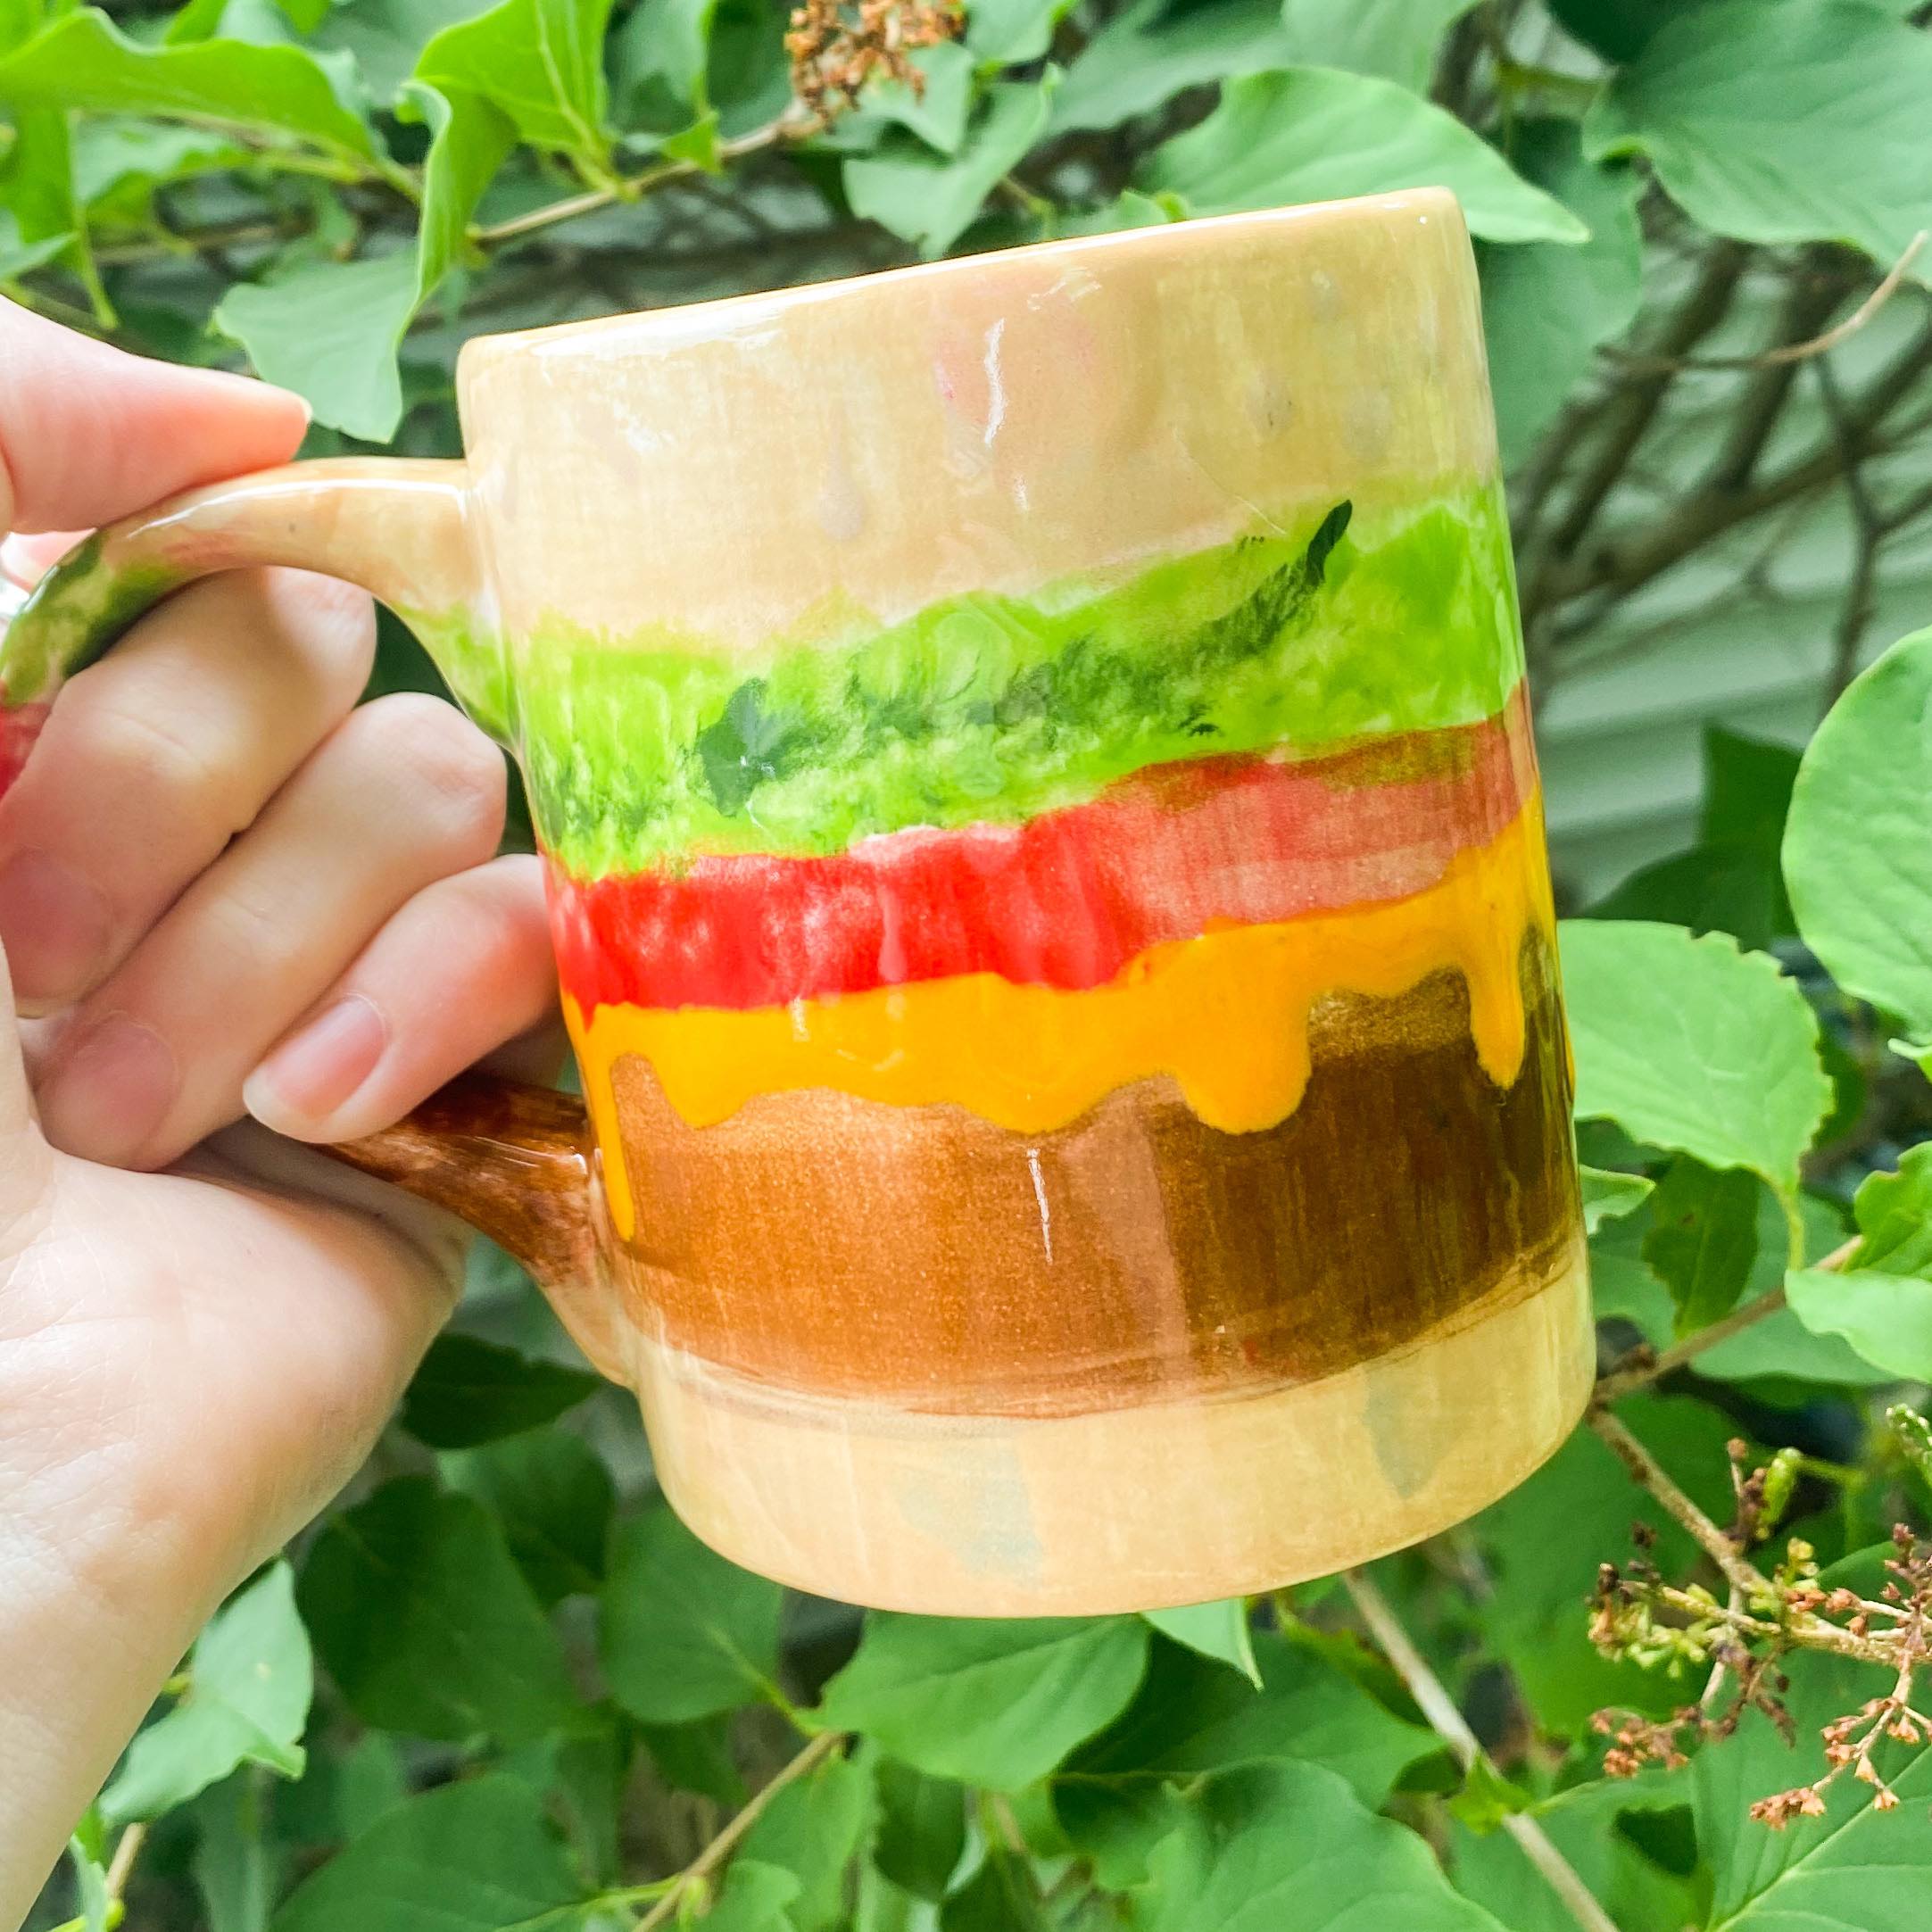 A person holding a cup with a hamburger on it.